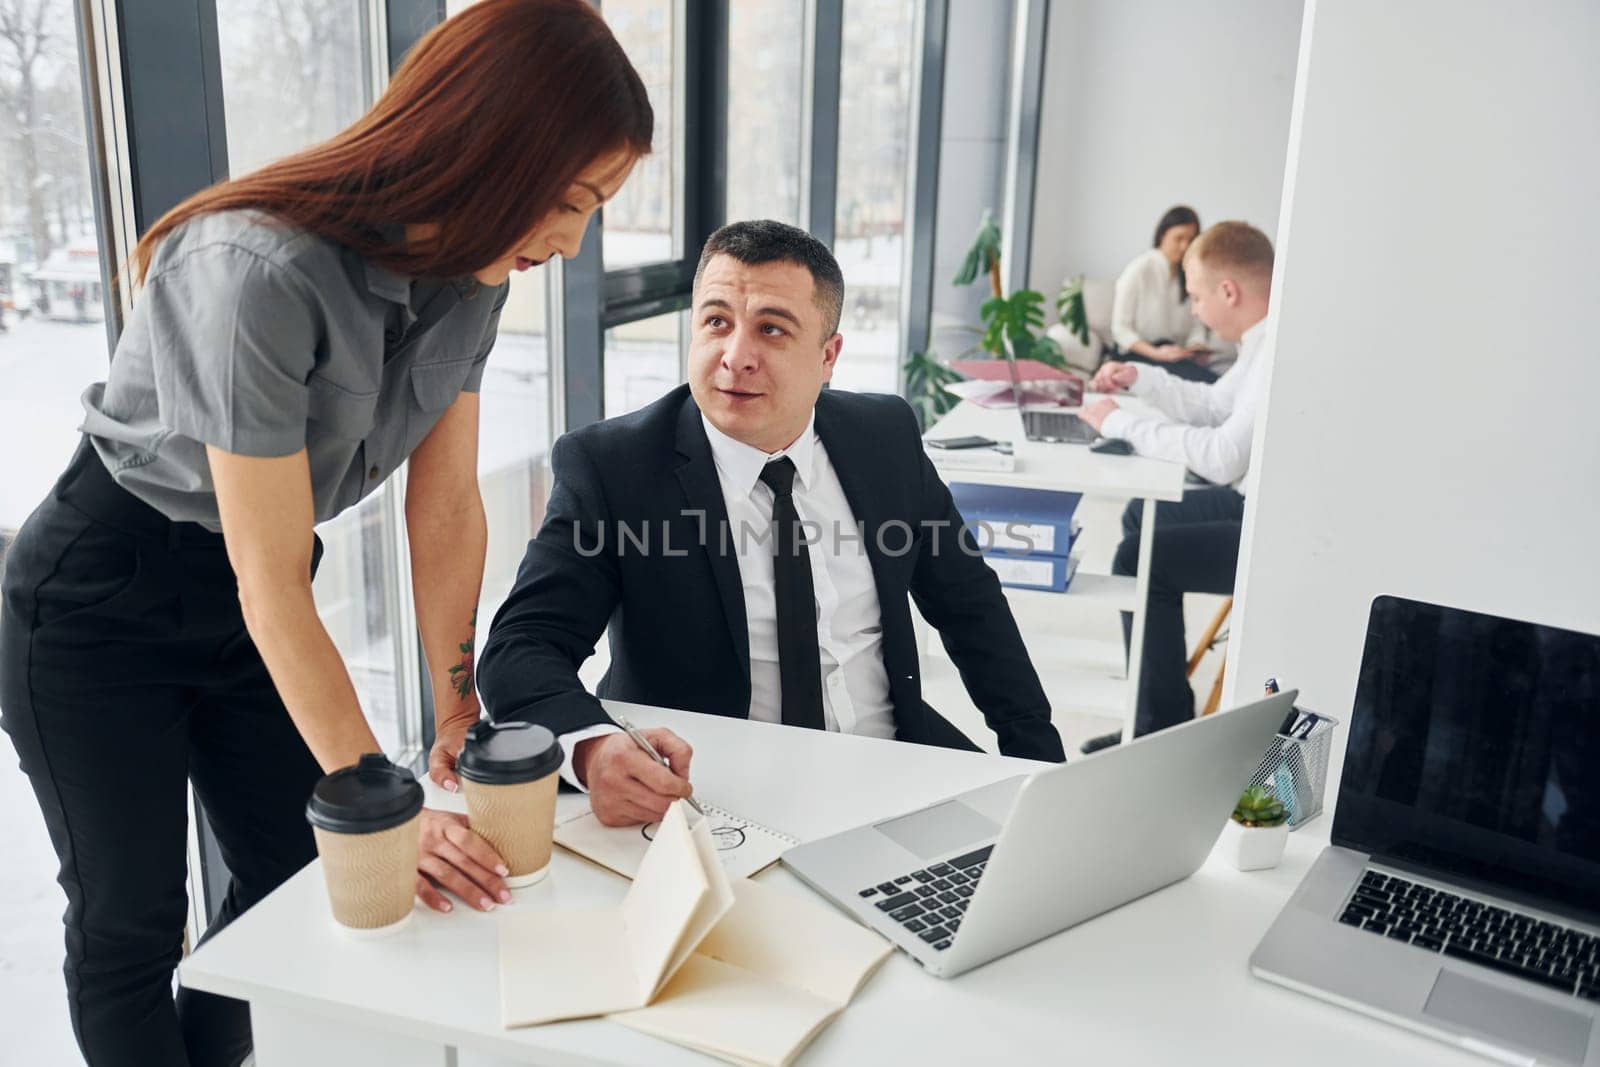 Works by using laptop. Group of people in official formal clothes that is indoors in the office.